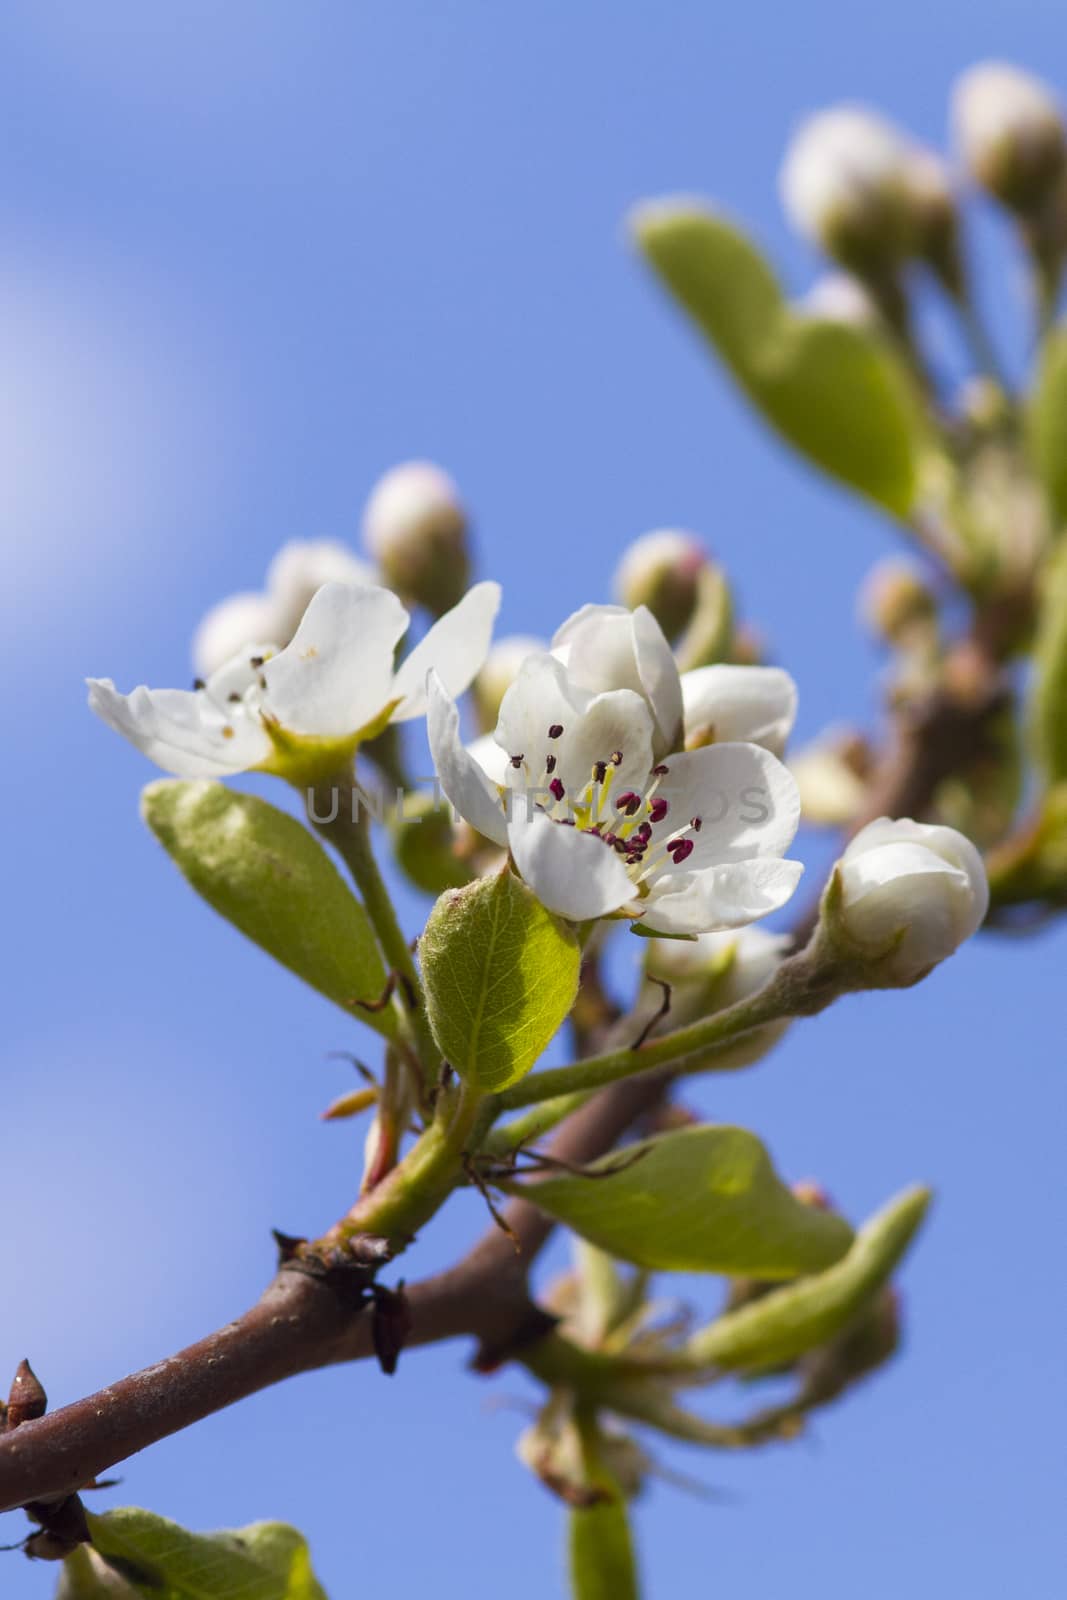 Pear Blossom closeup with blue sky and clouds